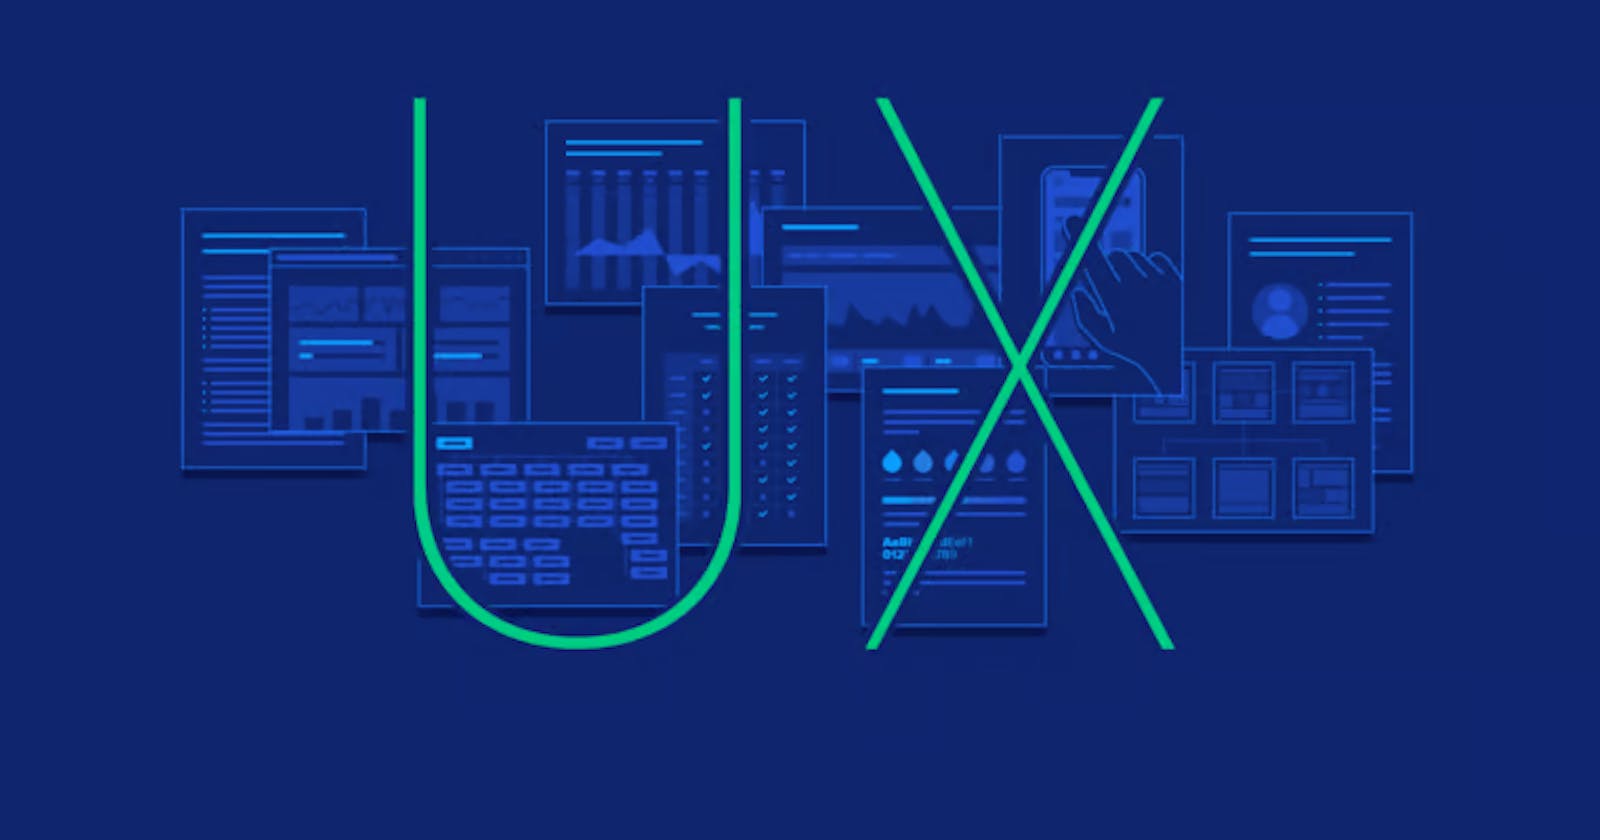 User Experience Design (UXD) - Getting Started.